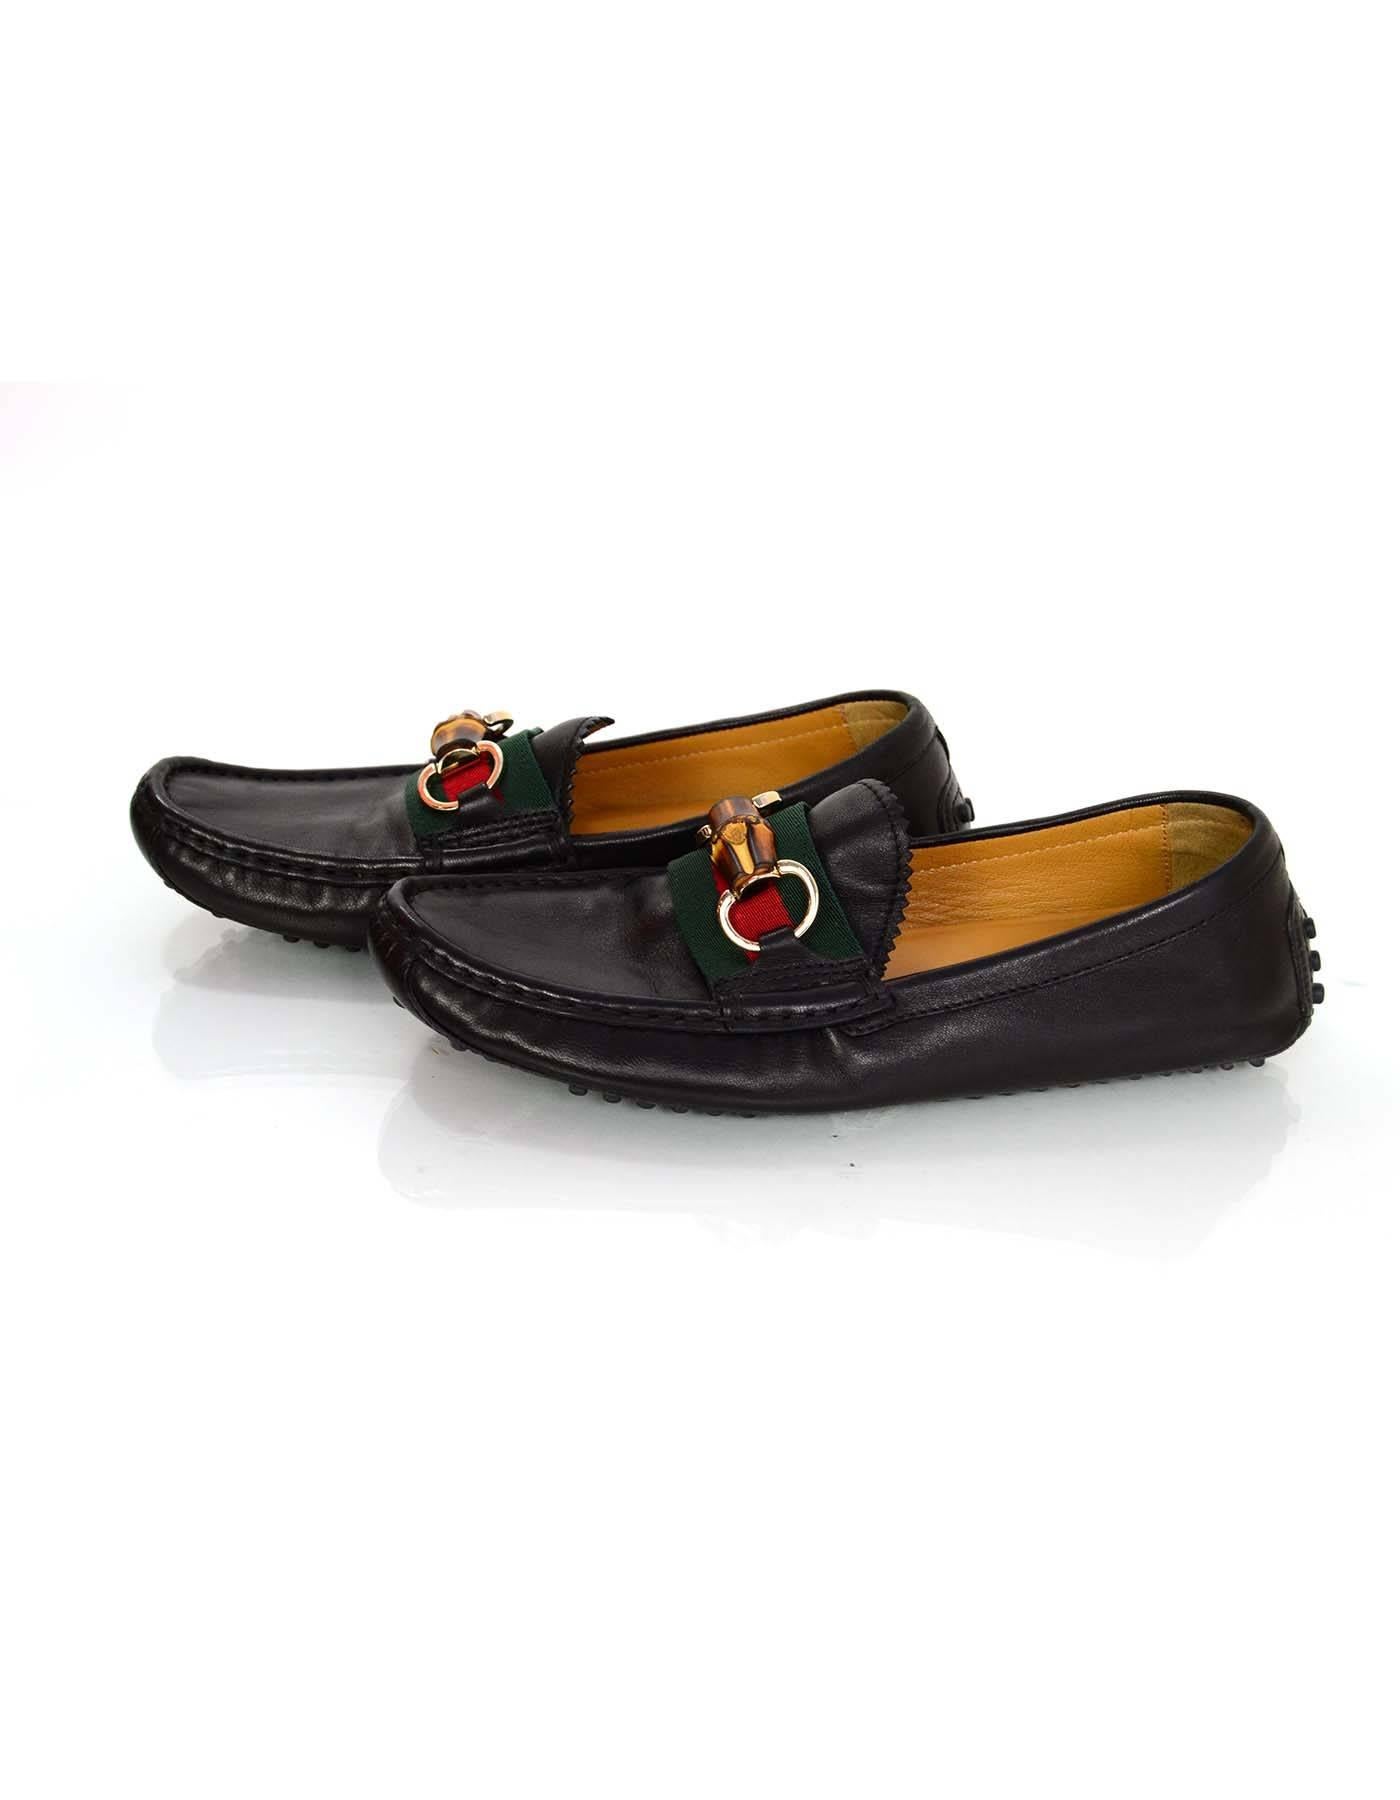 Gucci Black Leather Loafers Sz 36.5

Features red and green web and bamboo horsebit detail

Made In: Italy
Color: Black, red, green
Materials: Leather
Closure/Opening: Slide on
Overall Condition: Excellent pre-owned condition with the